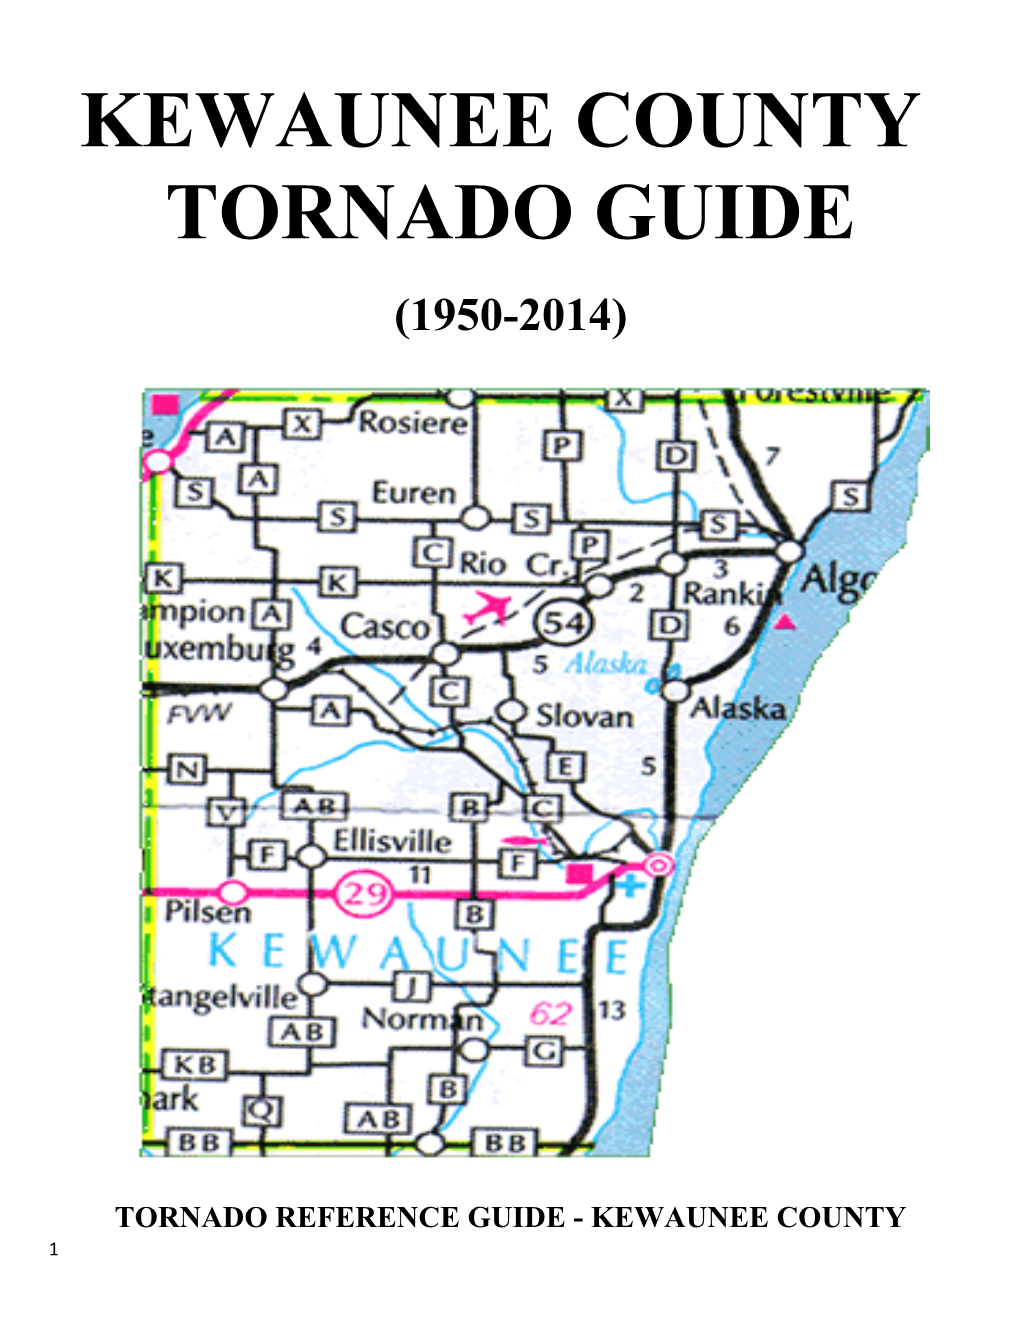 Tornado Reference Guide - Kewaunee County